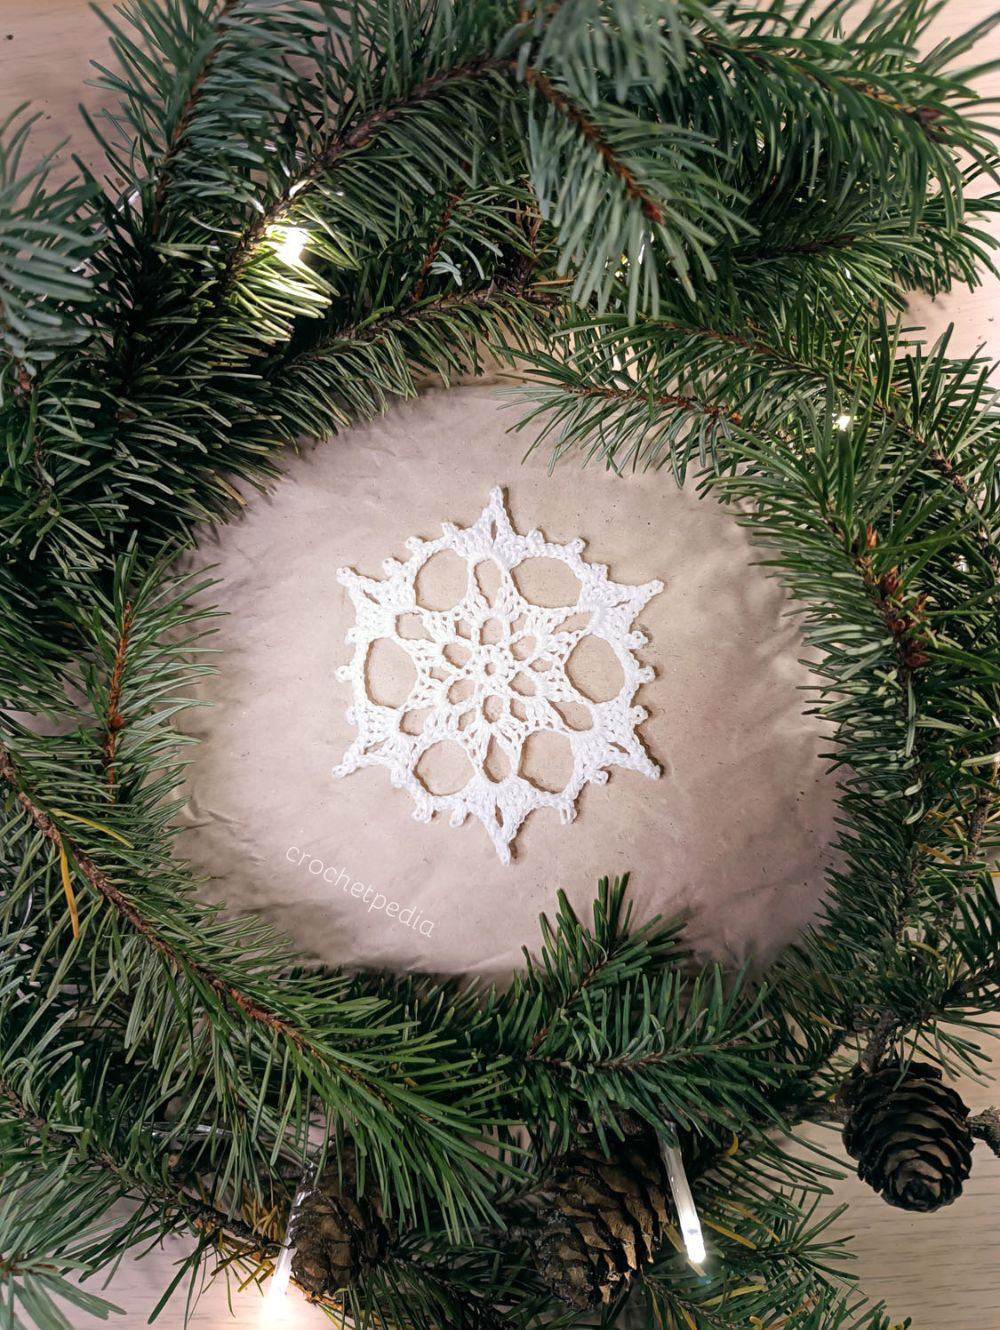 A white snowflake in the middle of a pine tree.